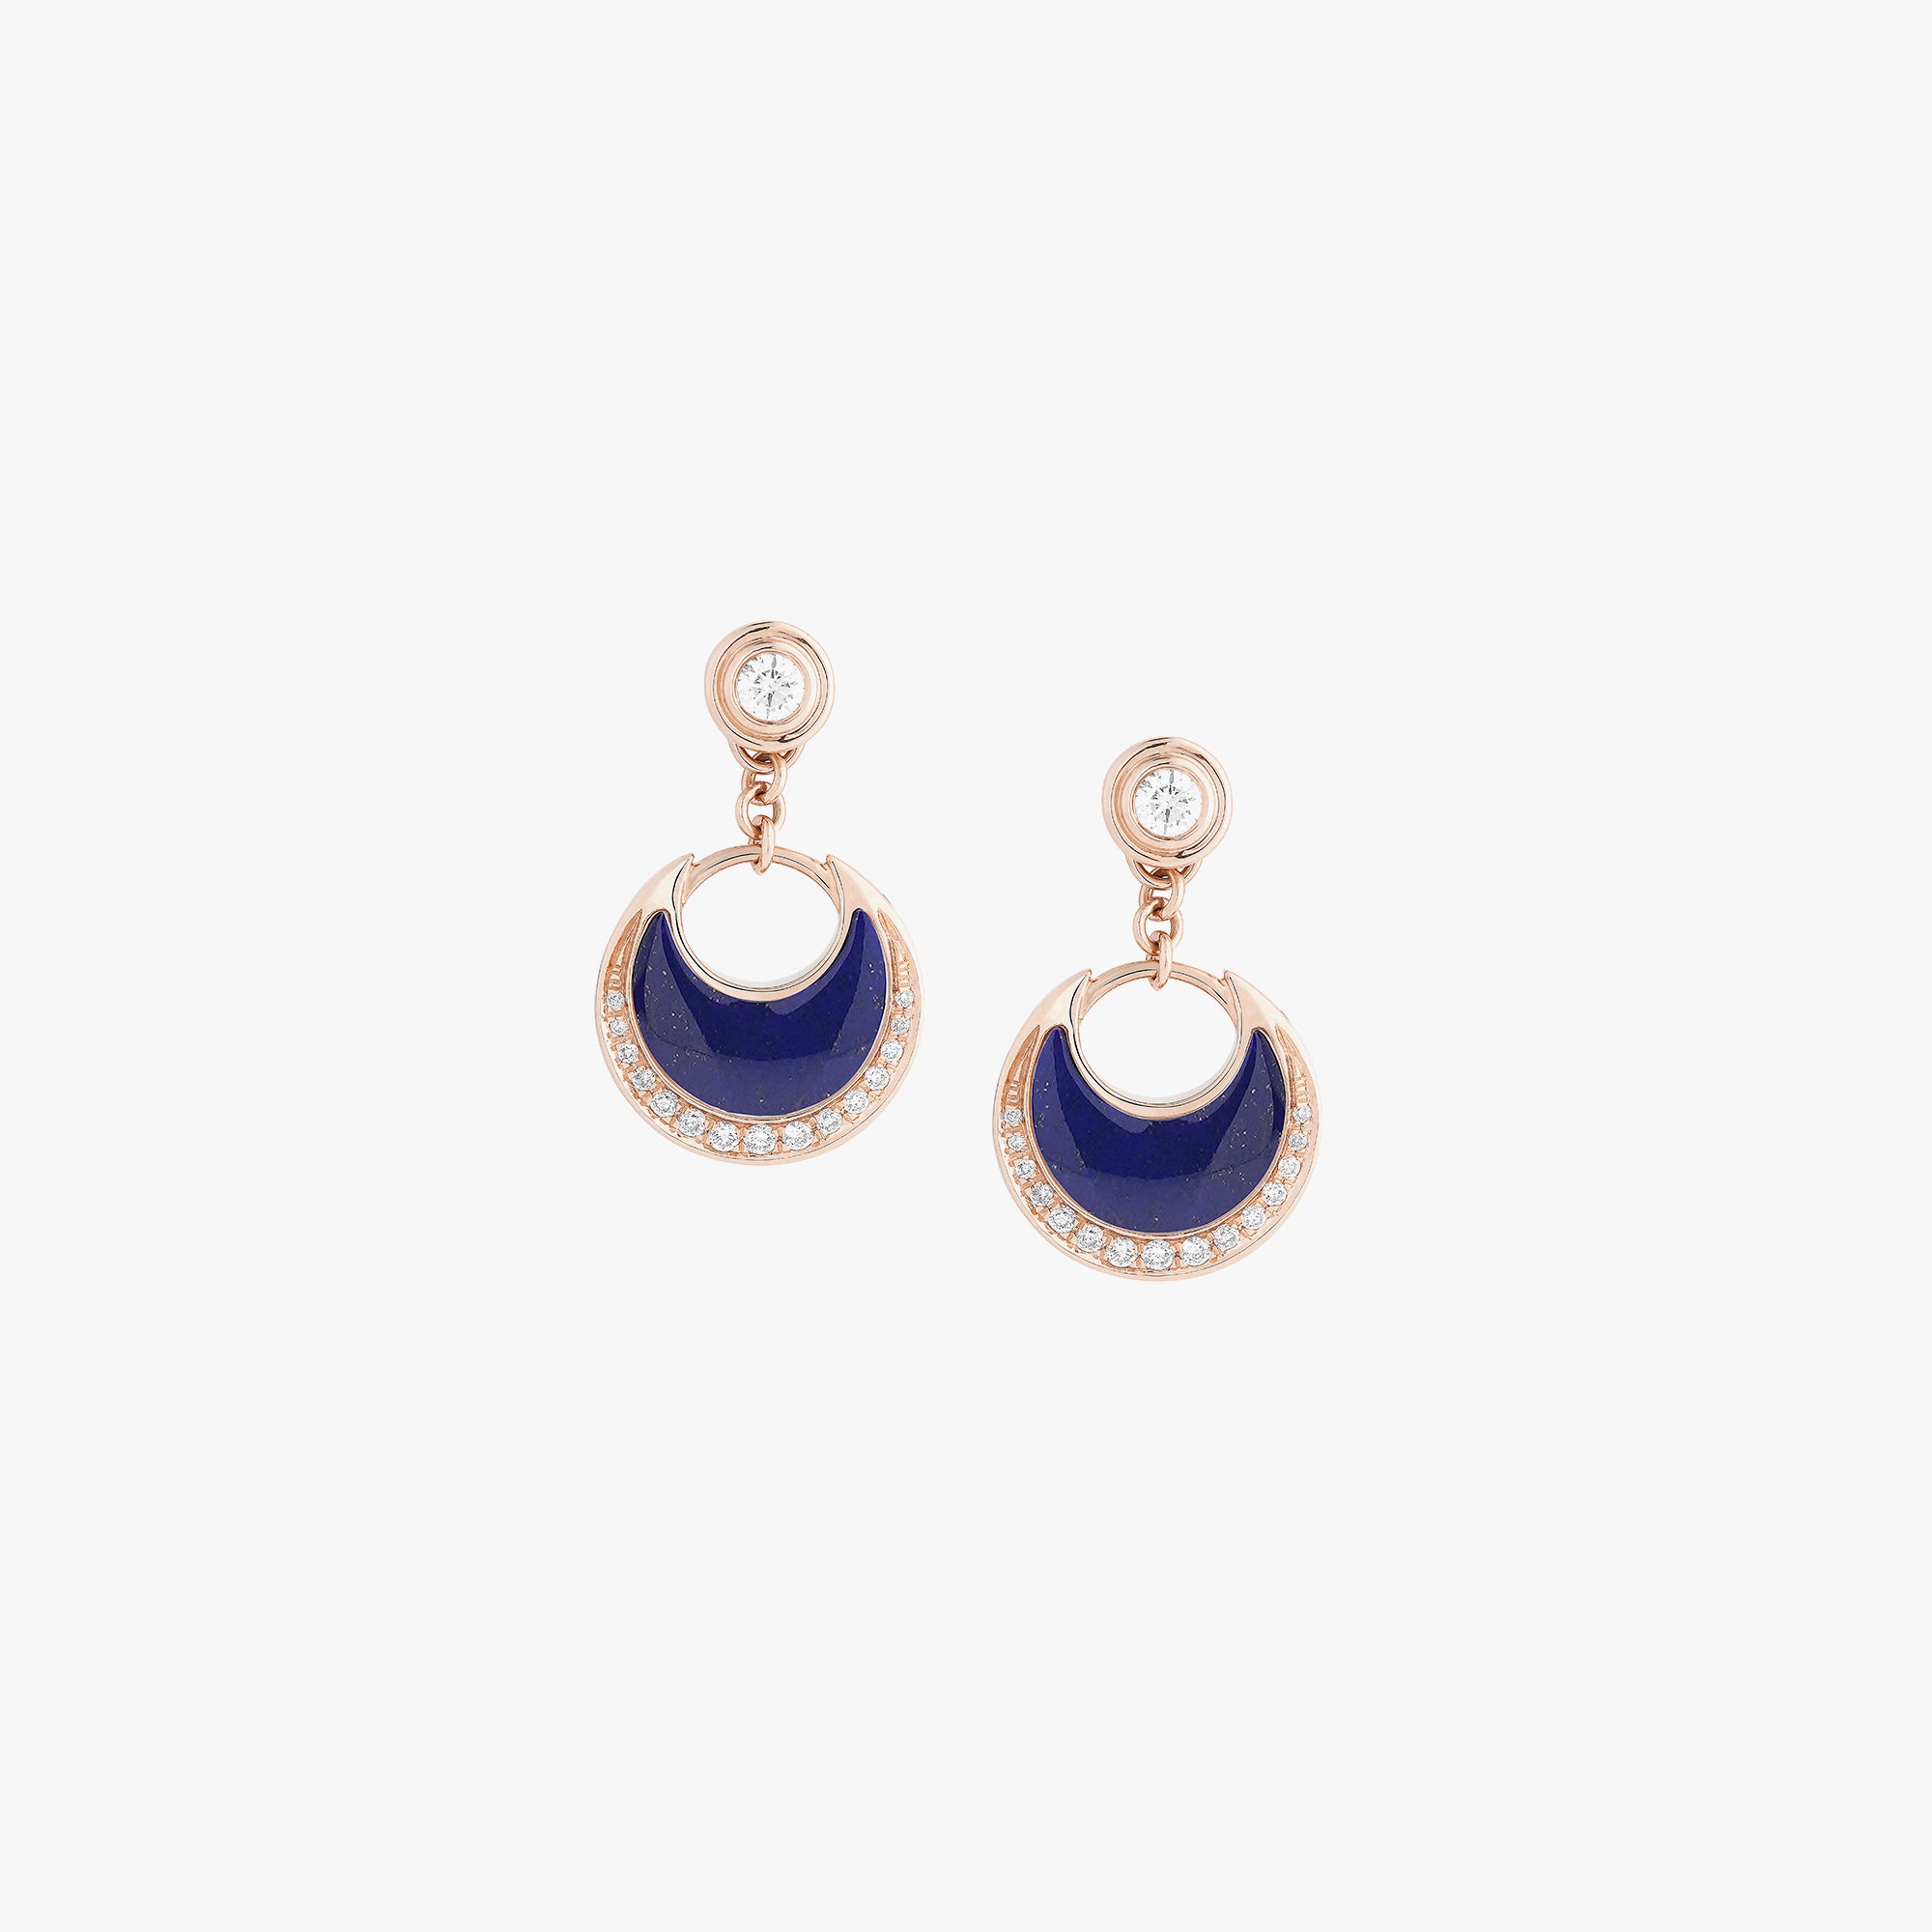 Al Hilal earrings in rose gold with lapis stone and diamonds